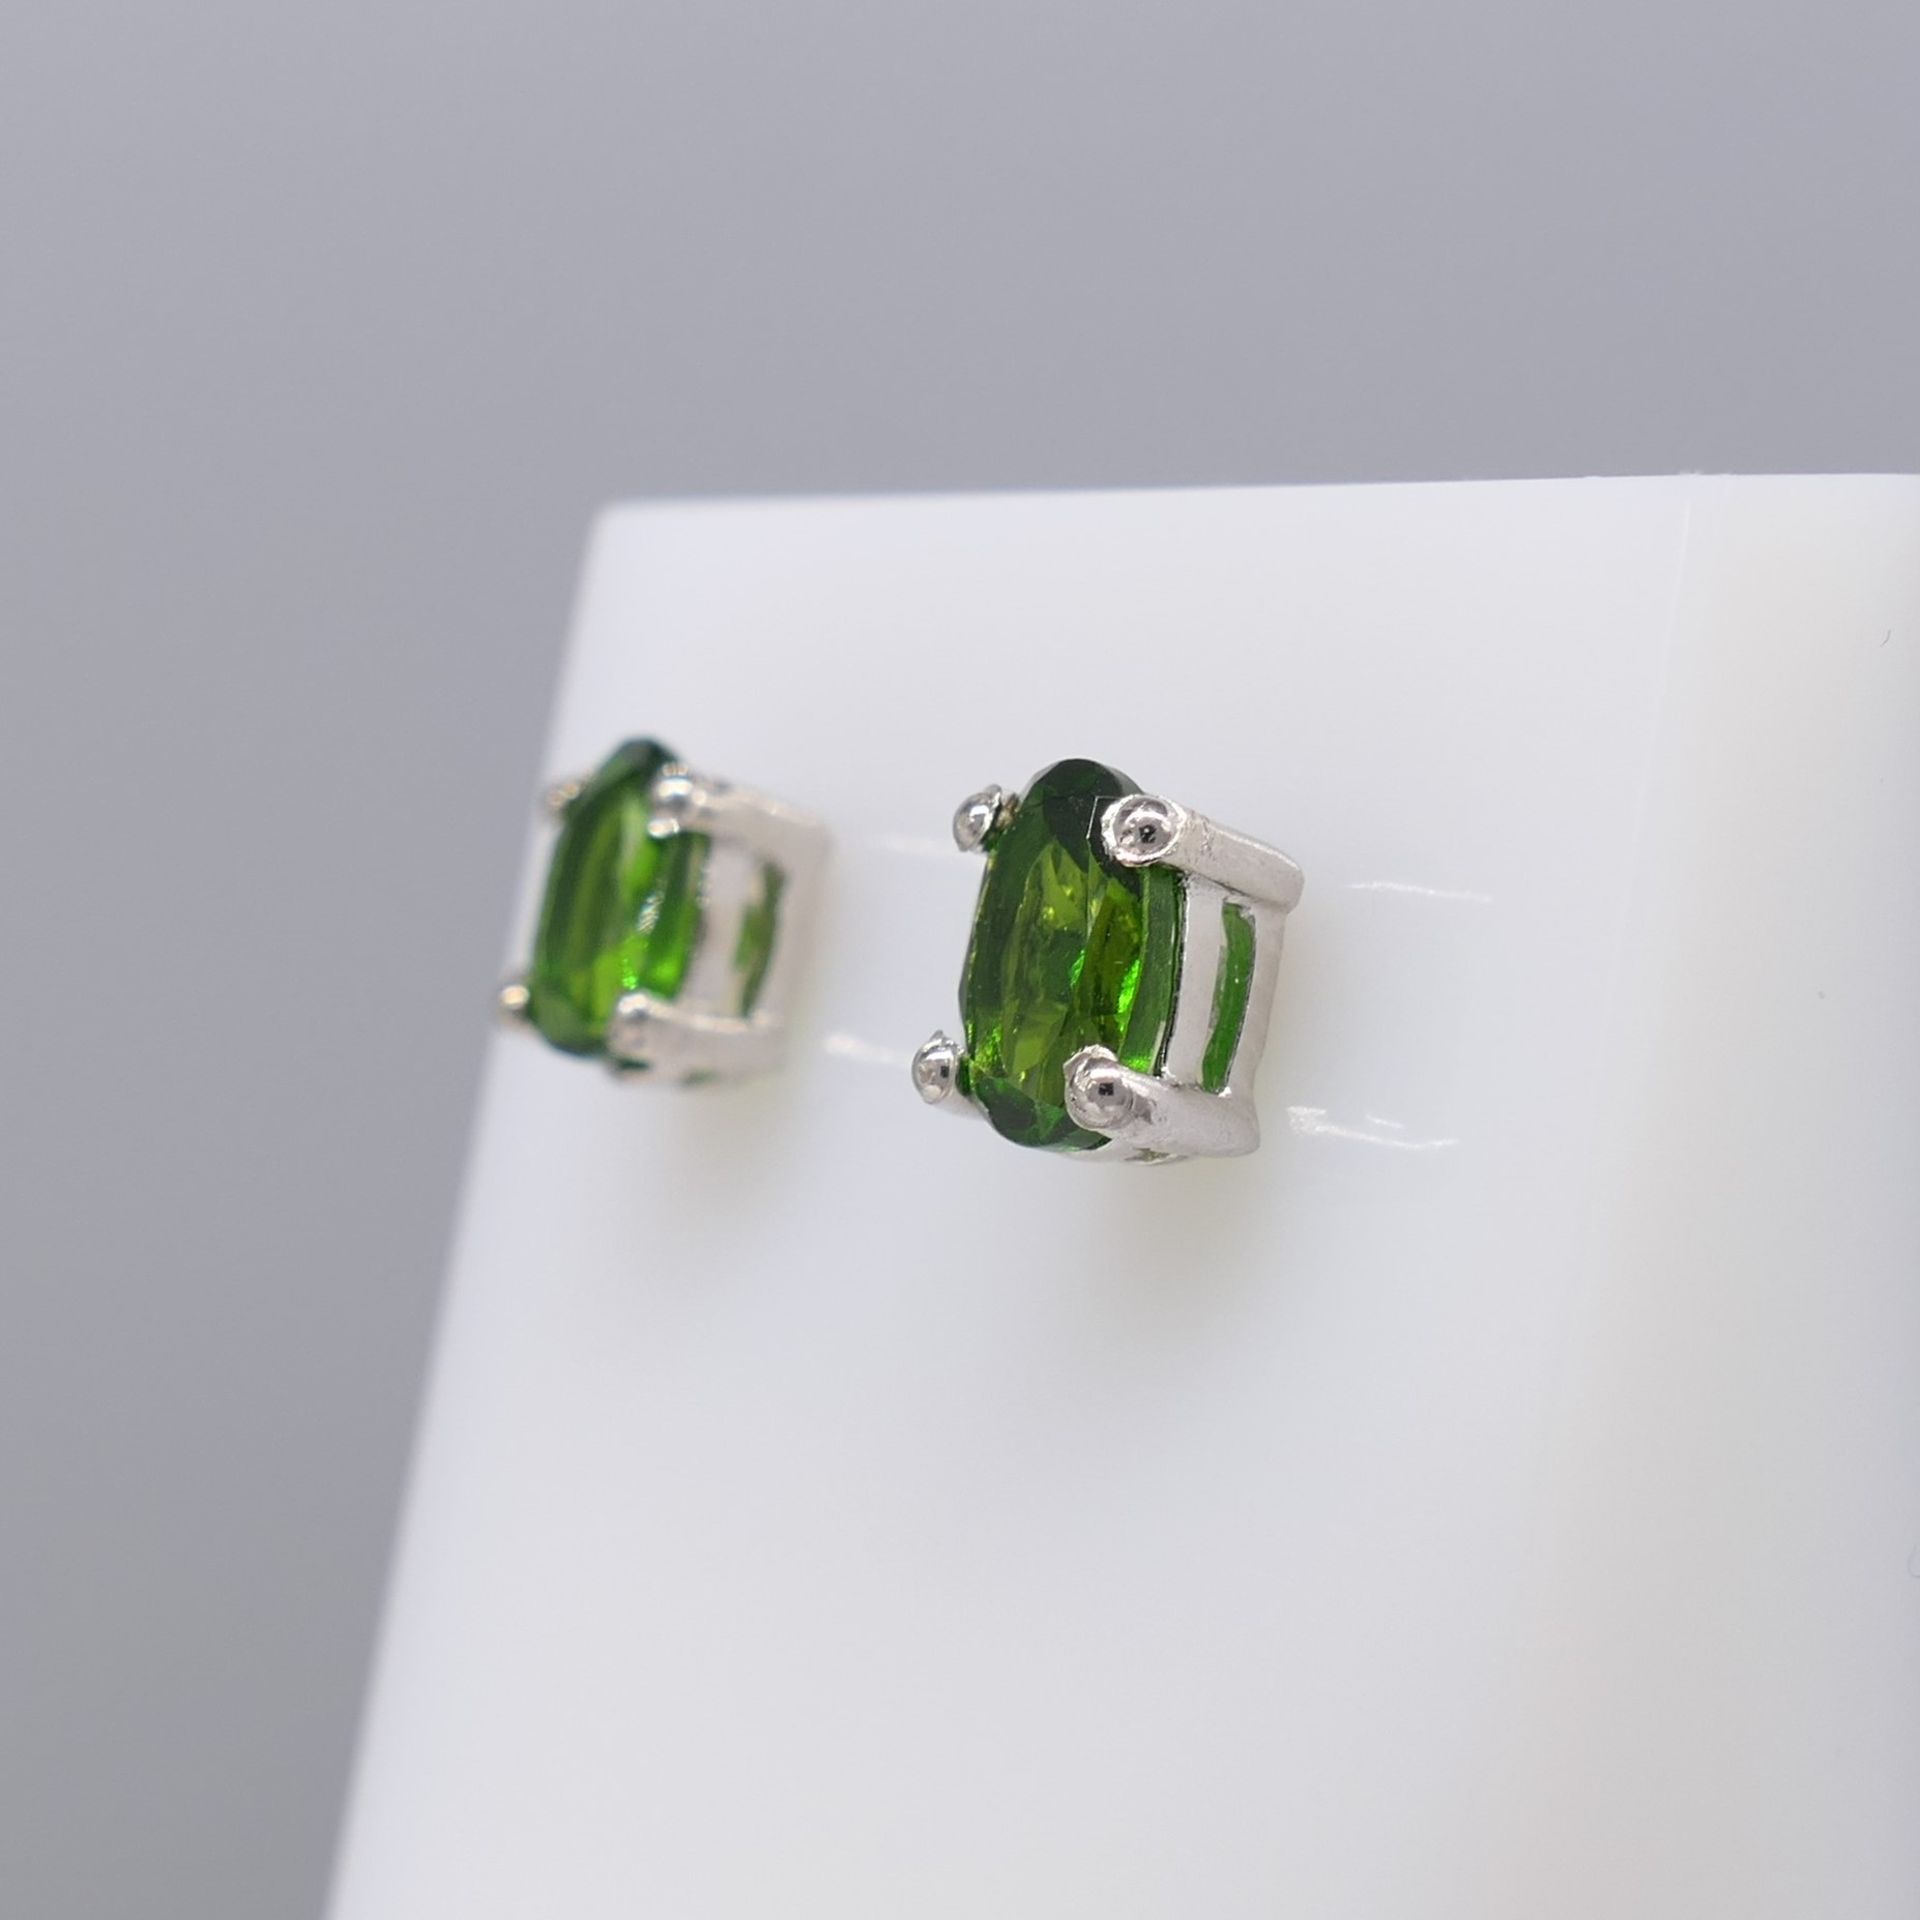 Pair of Natural Chrome Diopside Ear Studs In Sterling Silver - Image 3 of 6